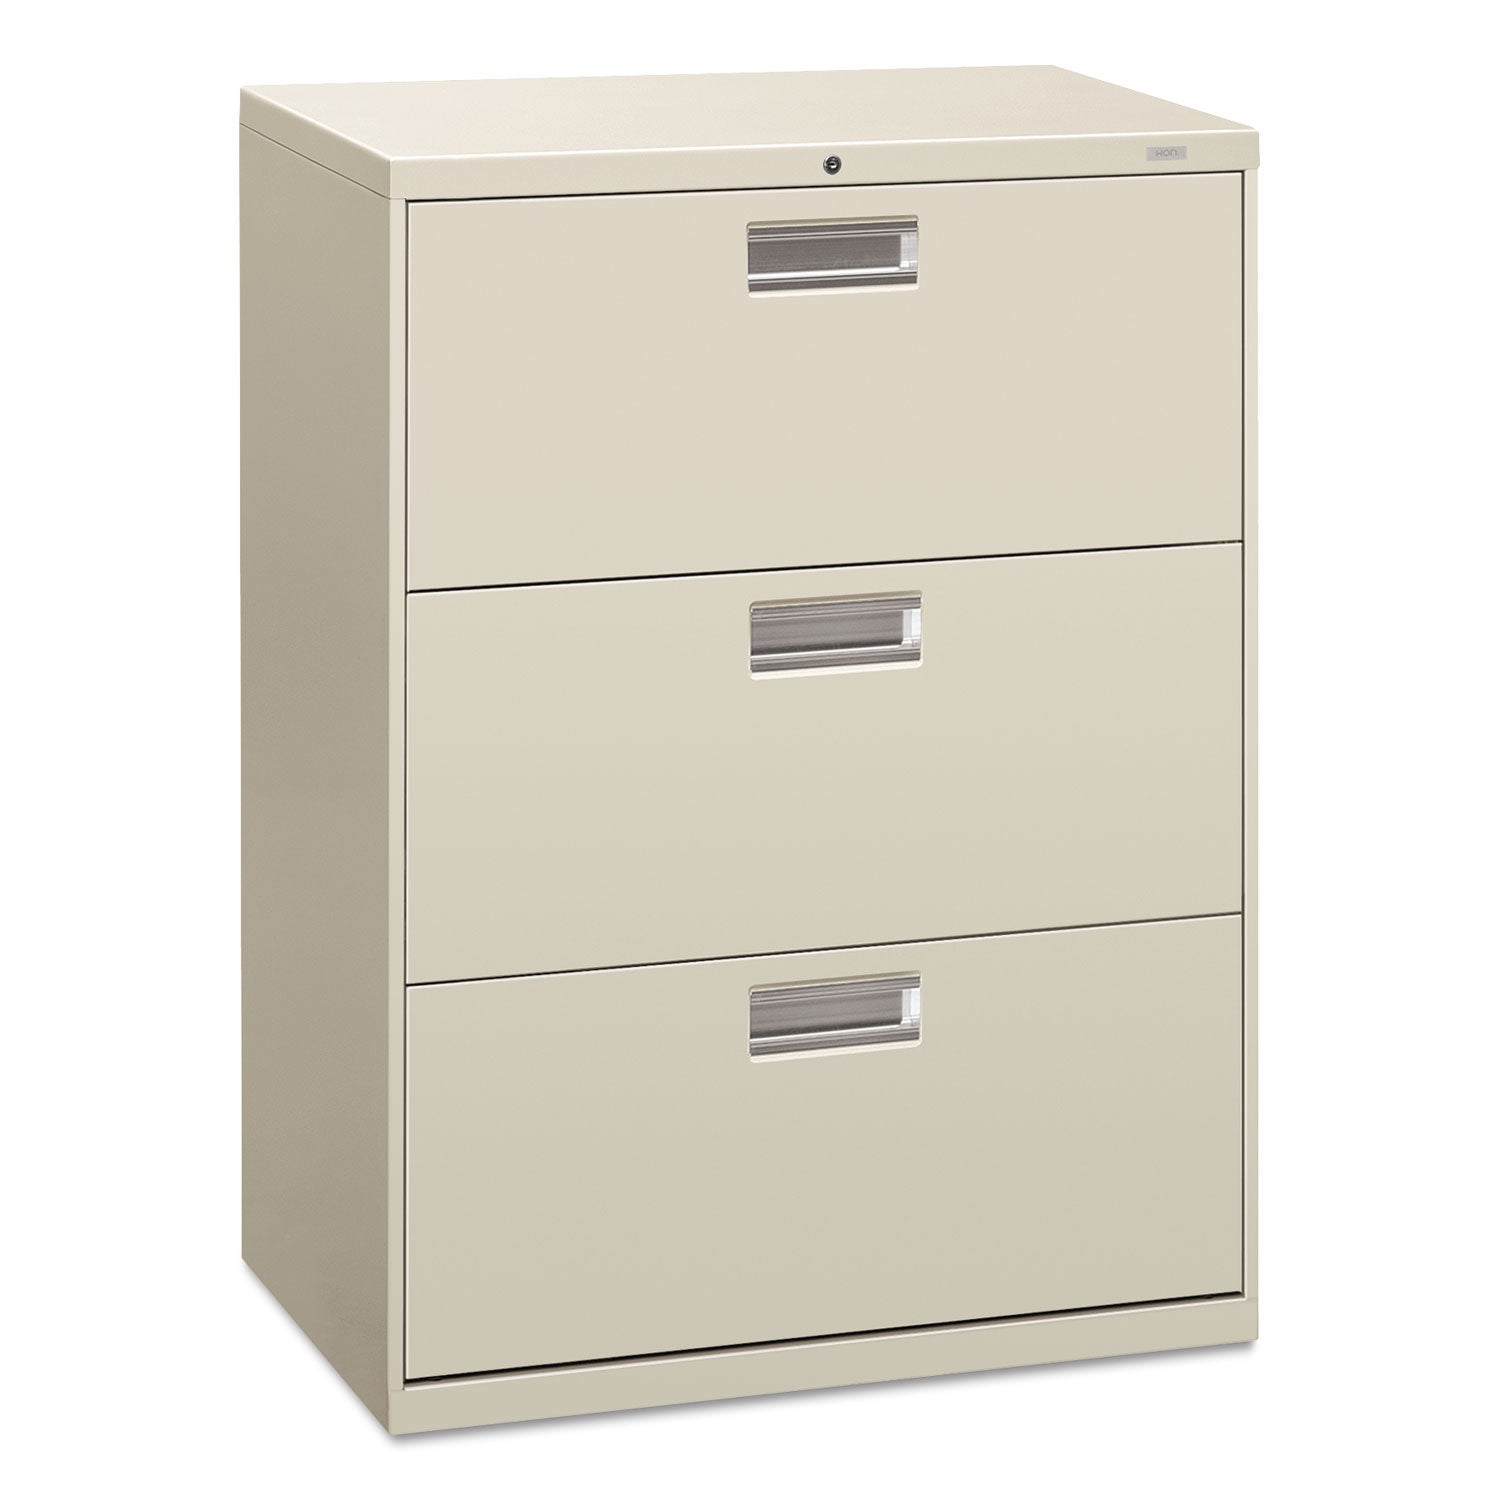 Brigade 600 Series Lateral File, 3 Legal/Letter-Size File Drawers, Light Gray, 30" x 18" x 39.13 - 